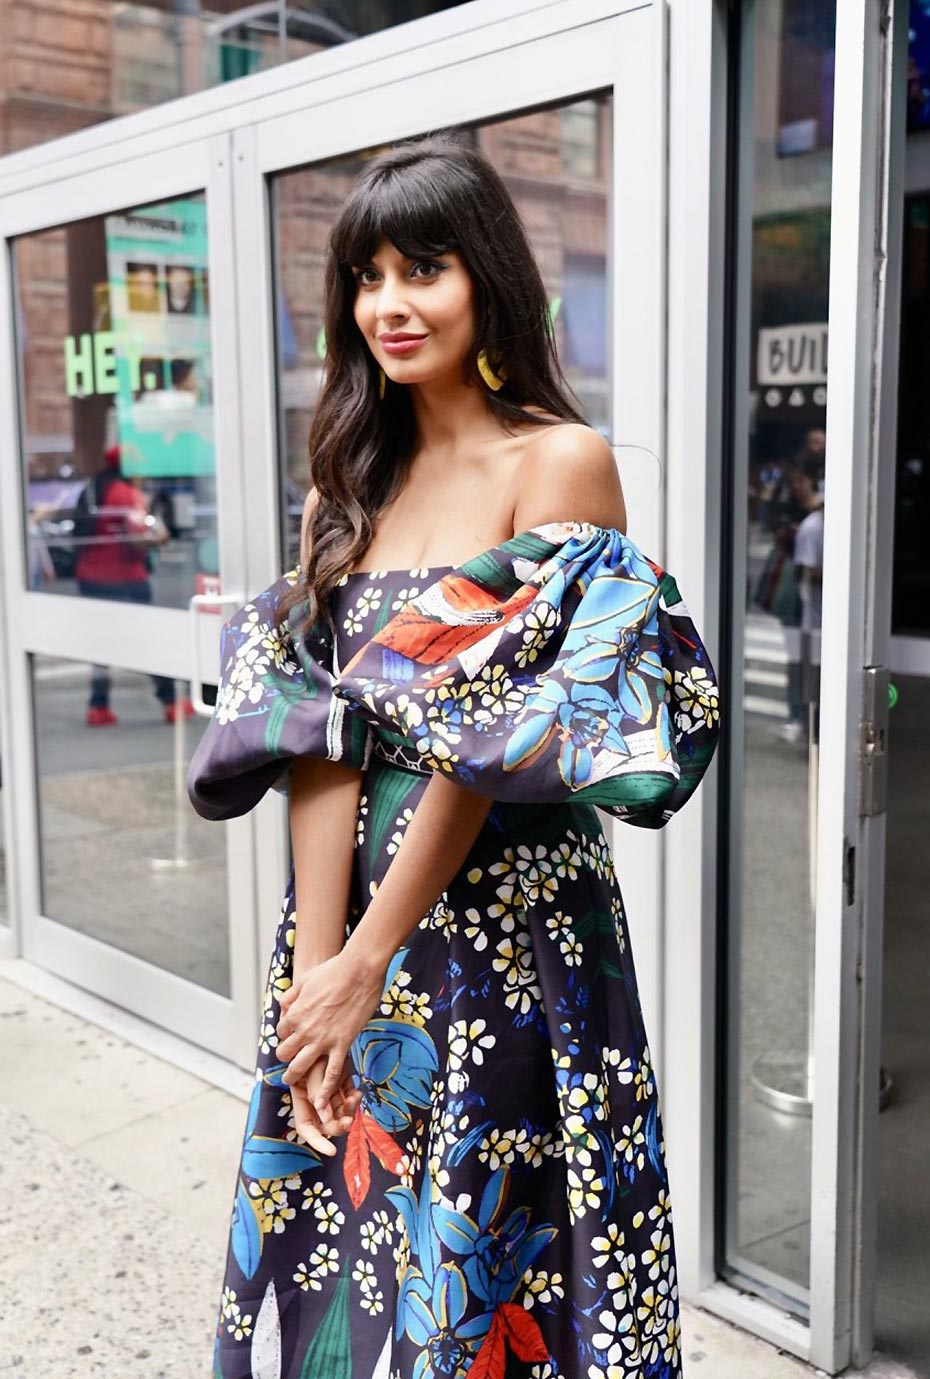 Jameela Jamil Sexy in a Floral Dress. 